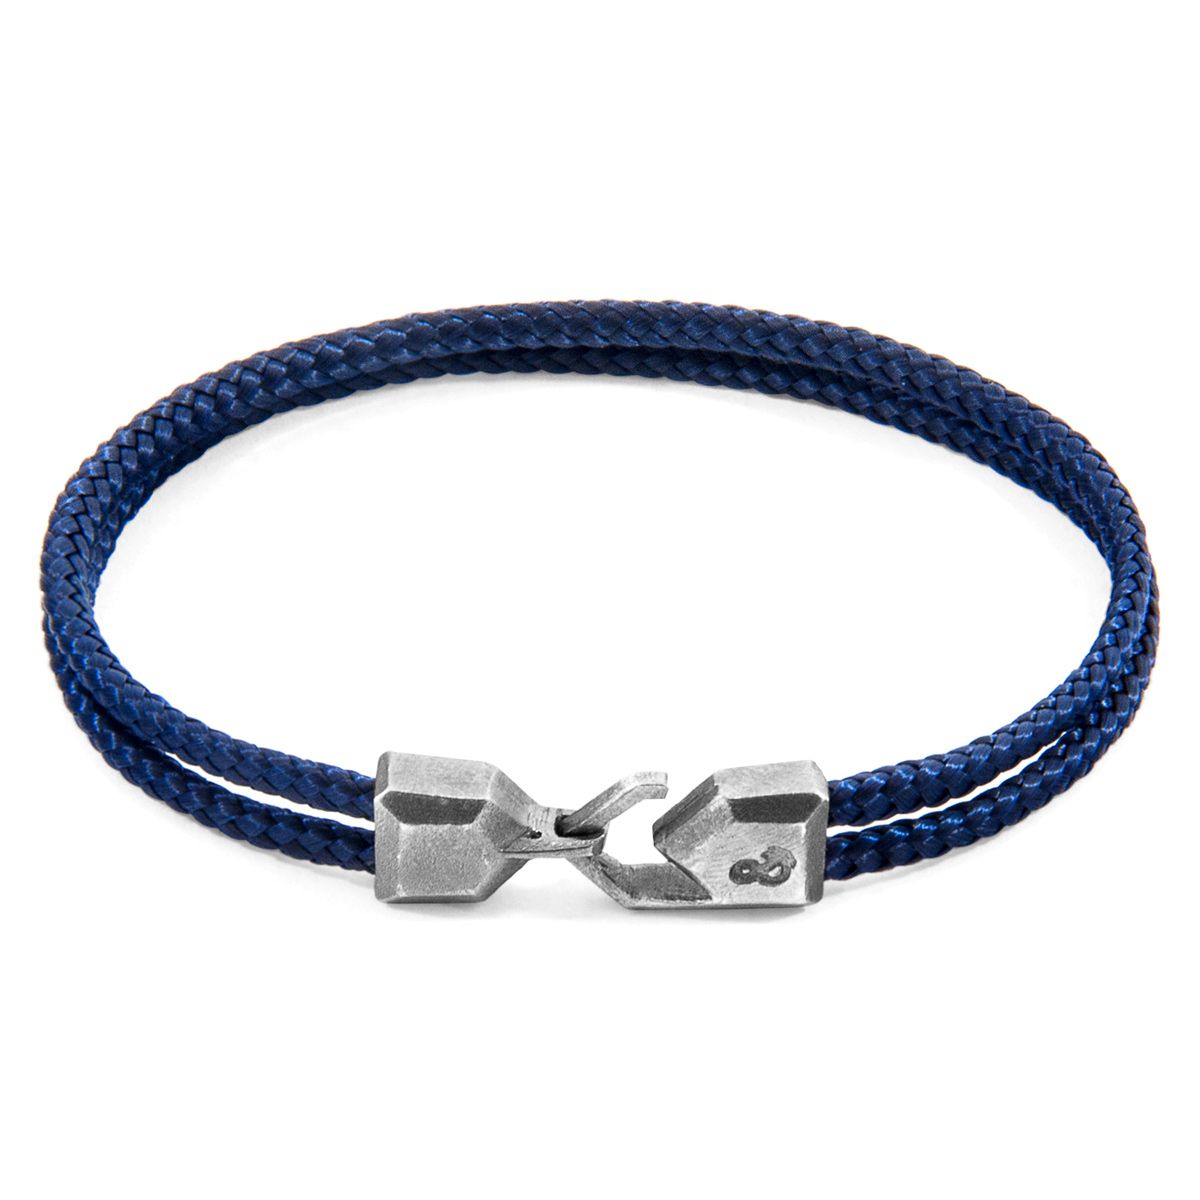 The Navy Blue Cromer Silver and Rope Bracelet was both designed and skilfully handcrafted completely in Great Britain, In Quality We Trust. For the Modern Journeyman (and woman), ANCHOR & CREW takes ownership of an exploratory lifestyle and enjoys the Happy-Good Life. Combining British craft manufacturing with a discerning modern-minimalist style, this ANCHOR & CREW bracelet features:

3mm diameter performance Marine Grade polyester and nylon rope (GB) 
Secure solid .925 sterling silver facetted lantern clasp and hook (GB) 
SIZING
This bracelet is available in four bracelet lengths, 17cm, 19cm, 21cm or 23cm in circumference. To take the bracelet on or off your wrist, simply slot the hook into the facetted lantern clasp and secure.